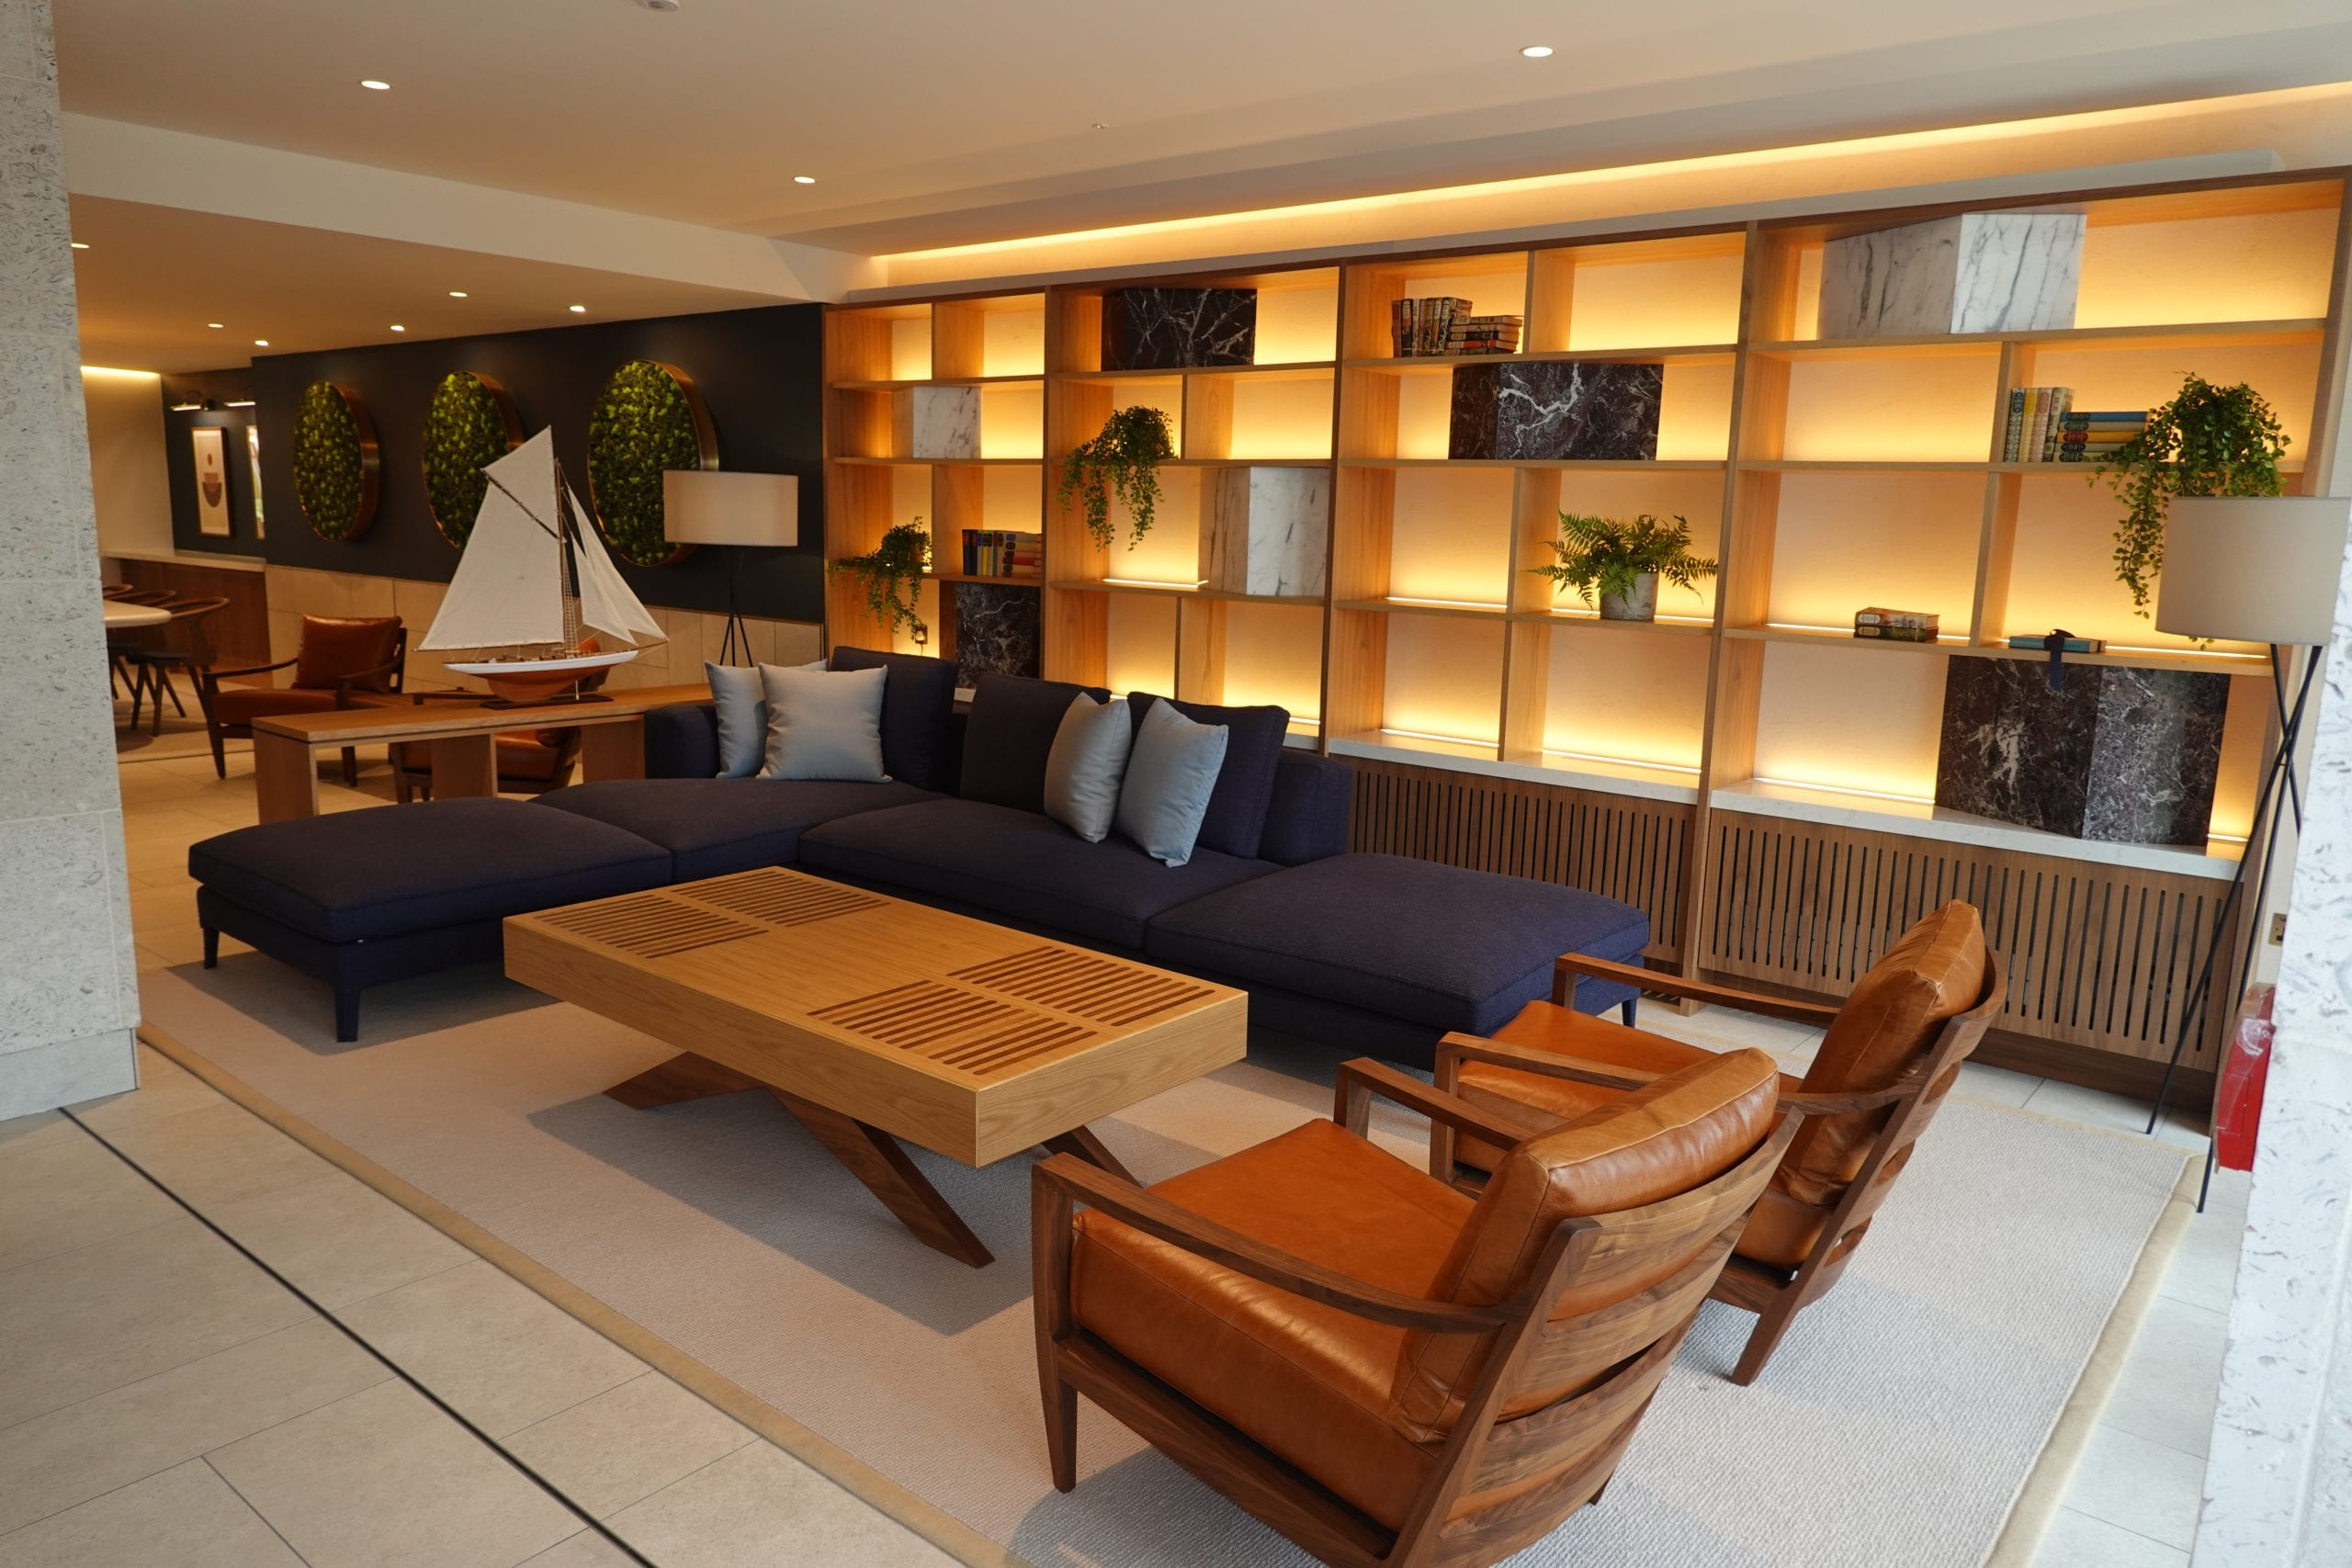 the finished interior of a block of flats in London helped by a contract administrator